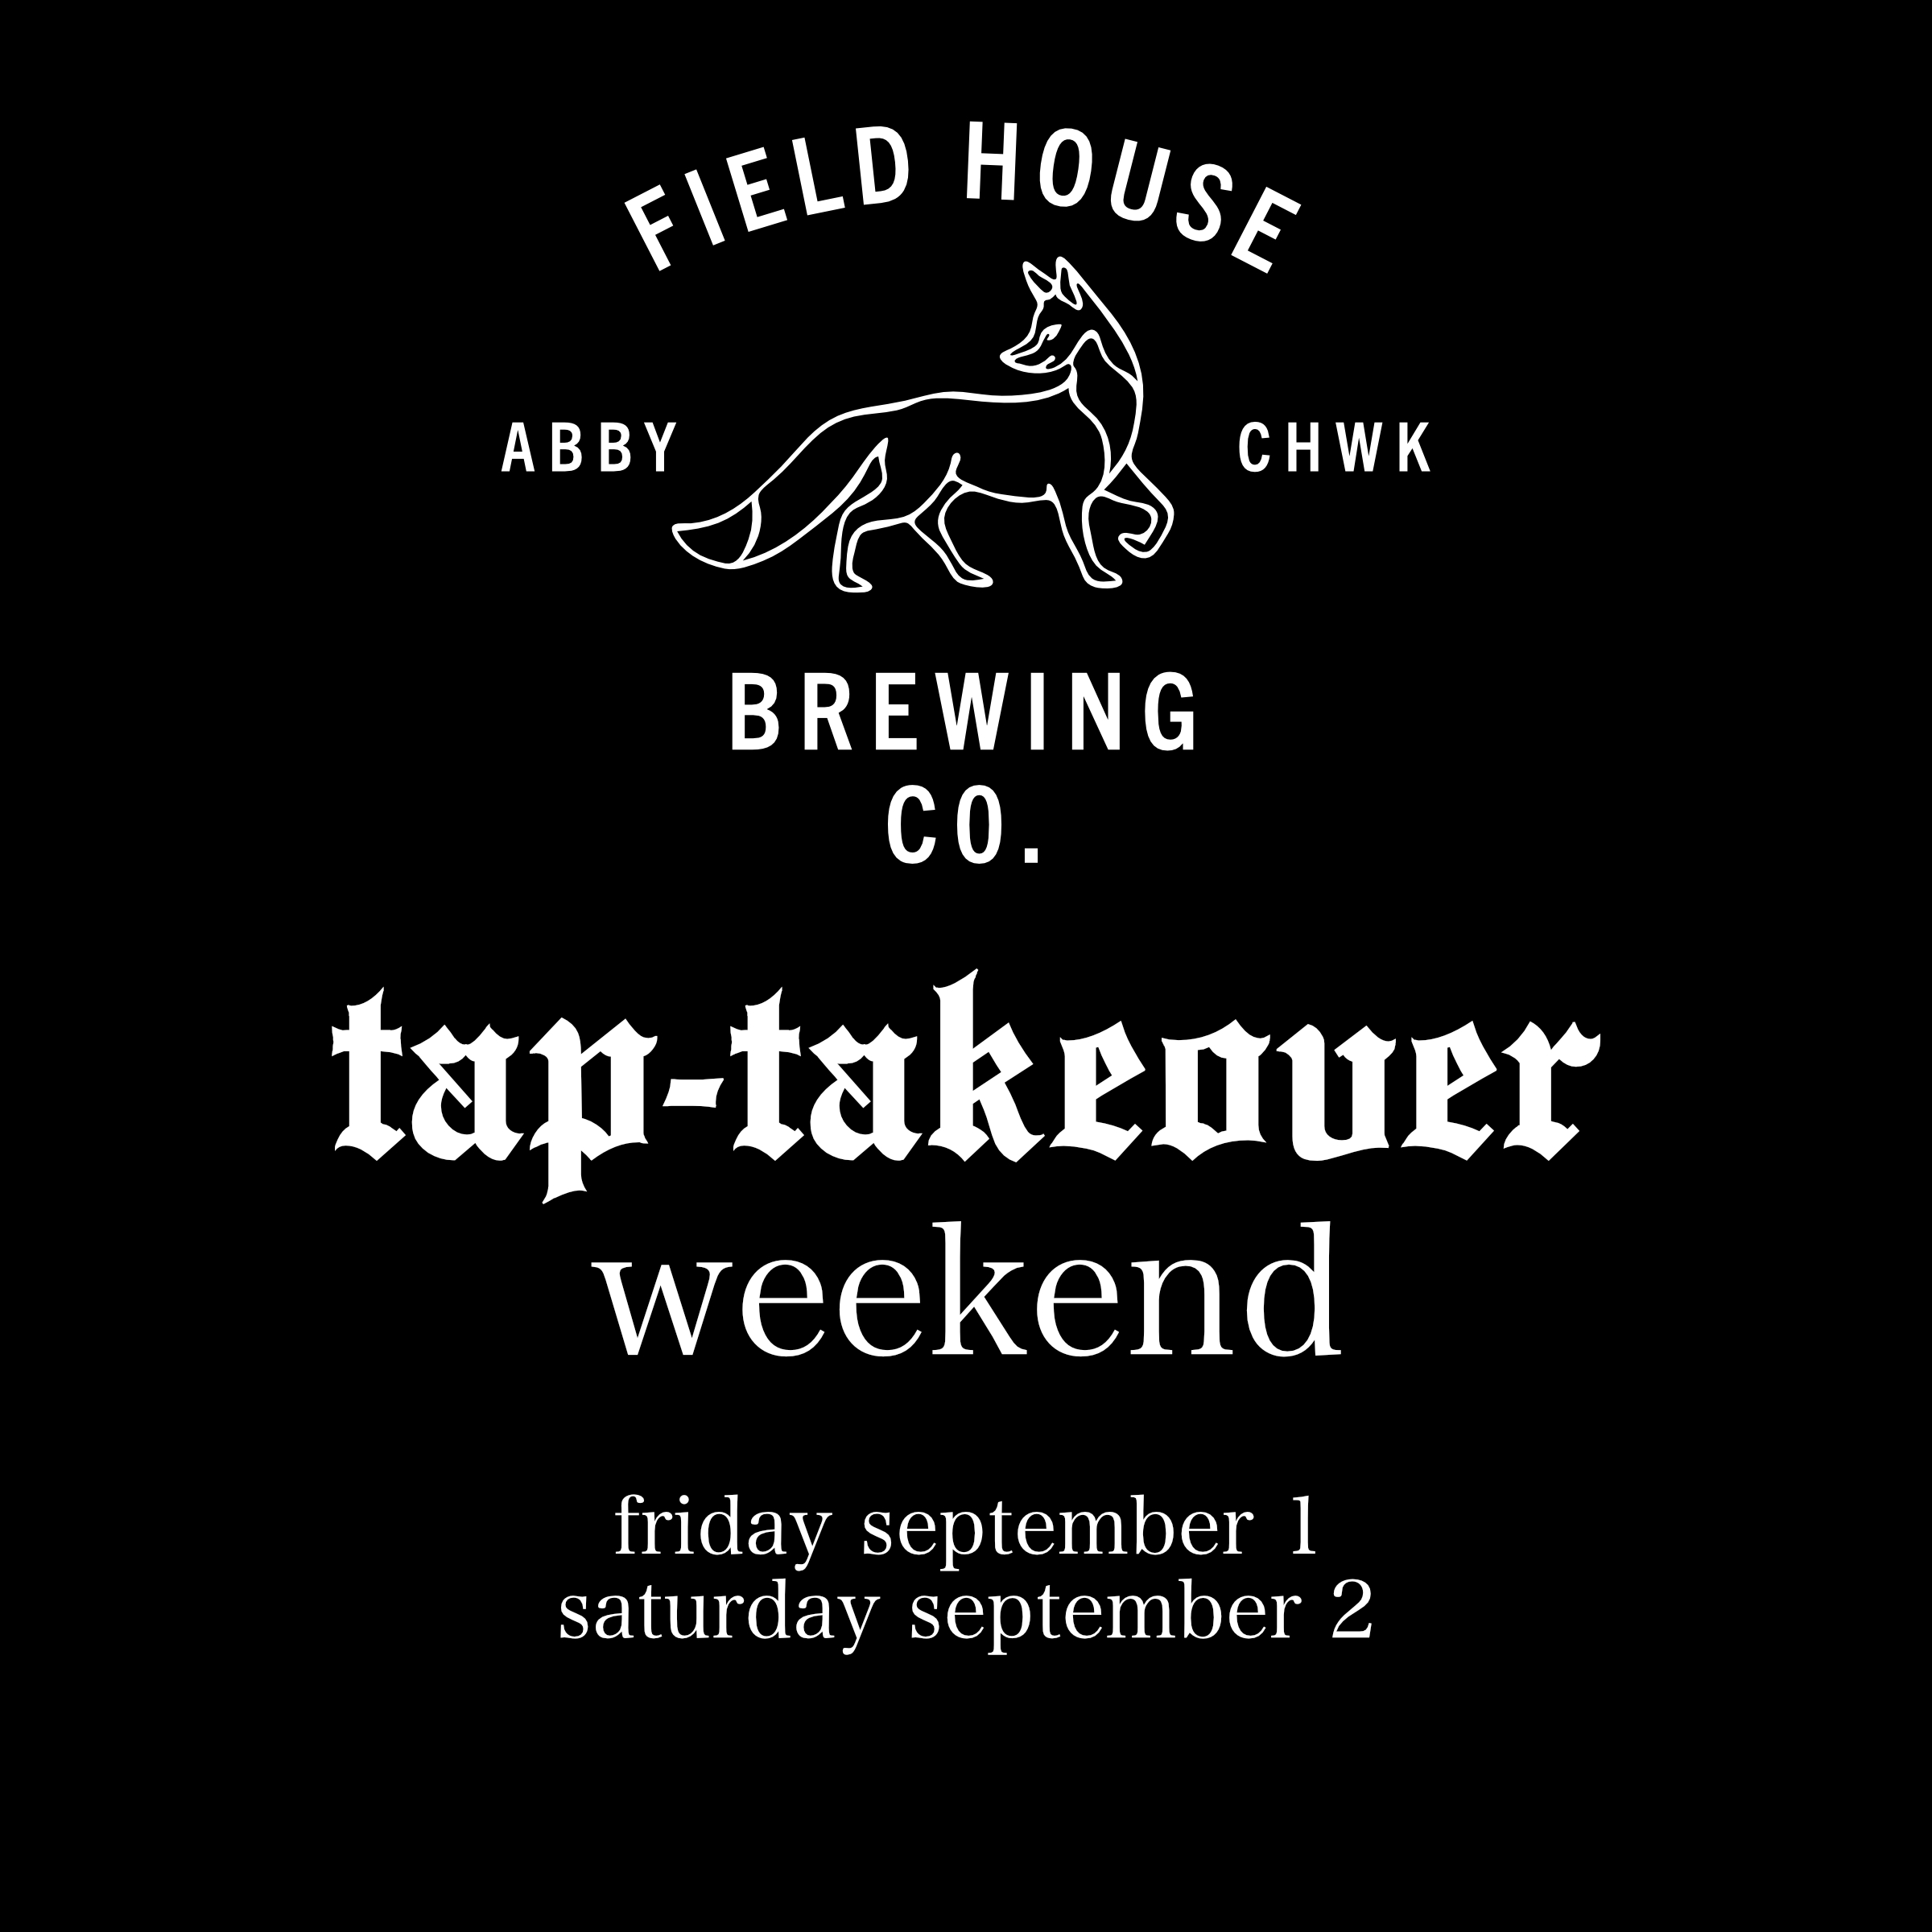 Field House Brewing TapTakeover